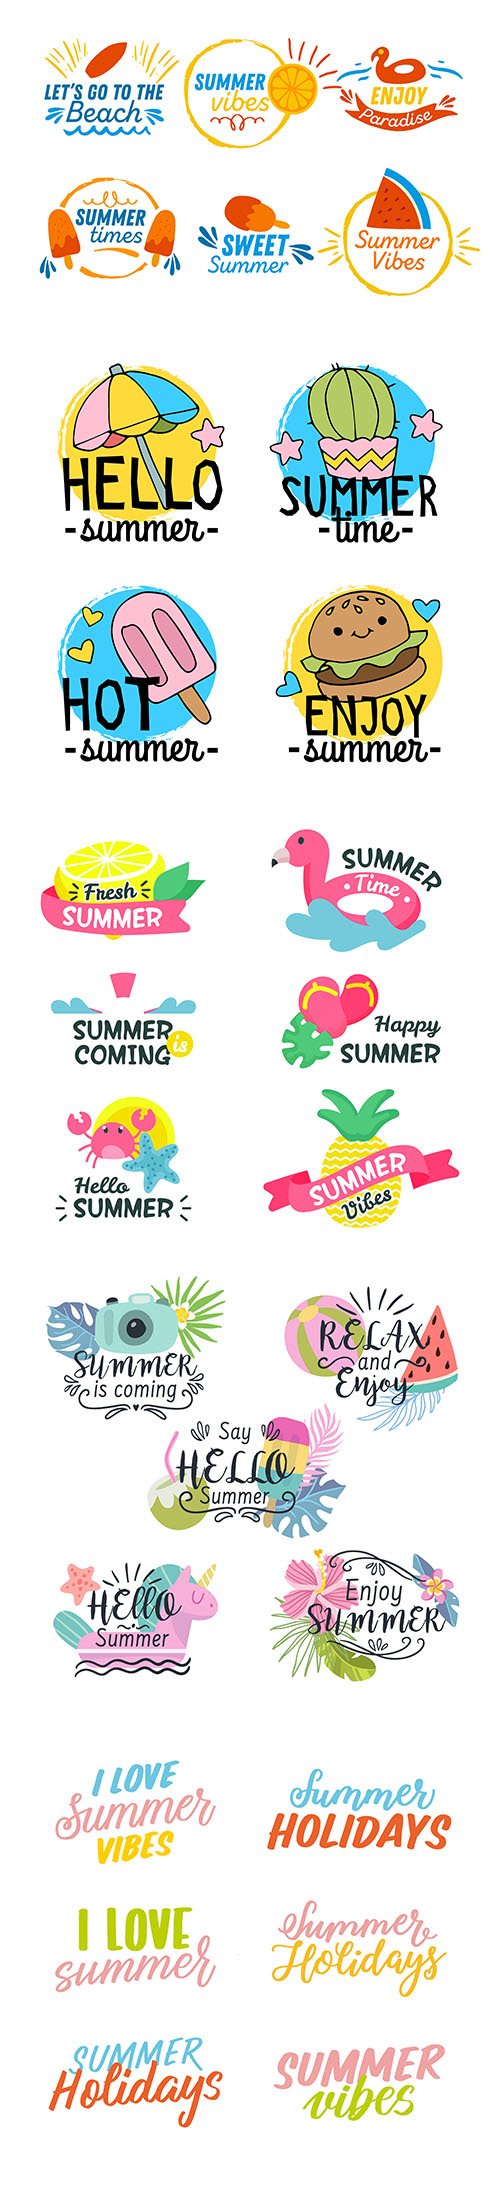 Colorful hand-drawn summer badge collection Vol2